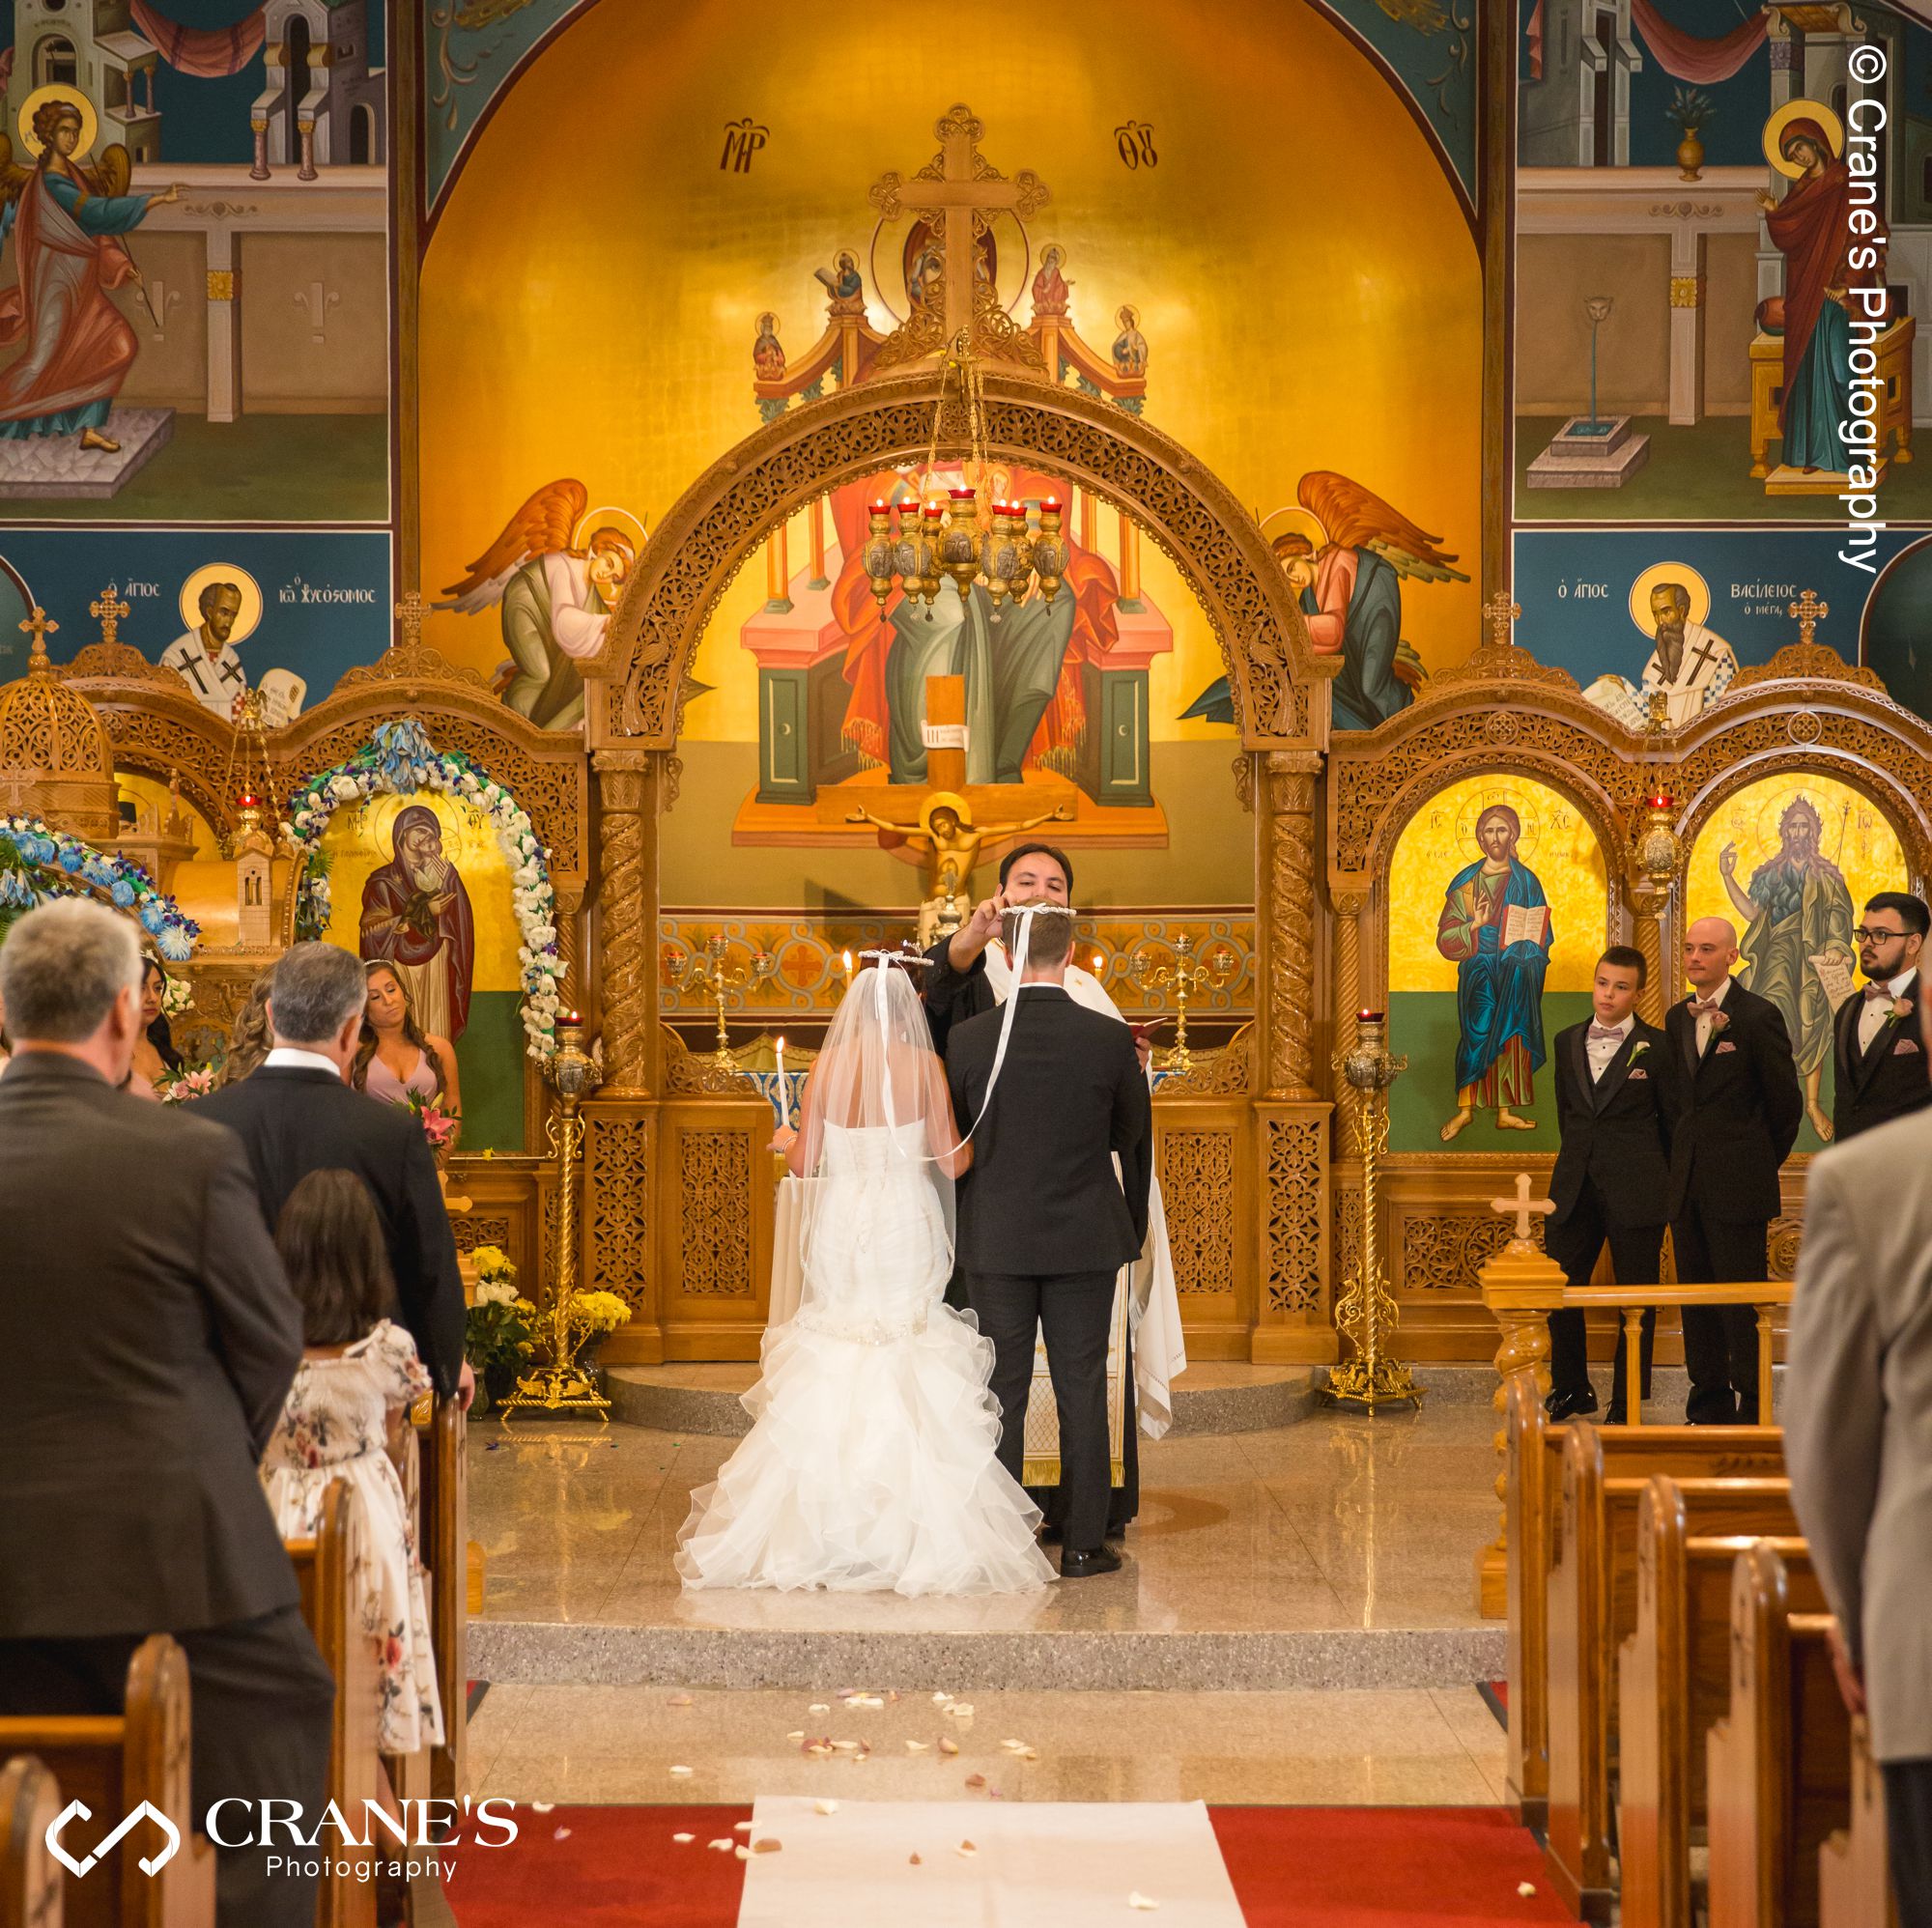 An orthodox wedding ritual "The crowning of the Bride and Groom" at the altar of St. Nectarios in Palatine, IL